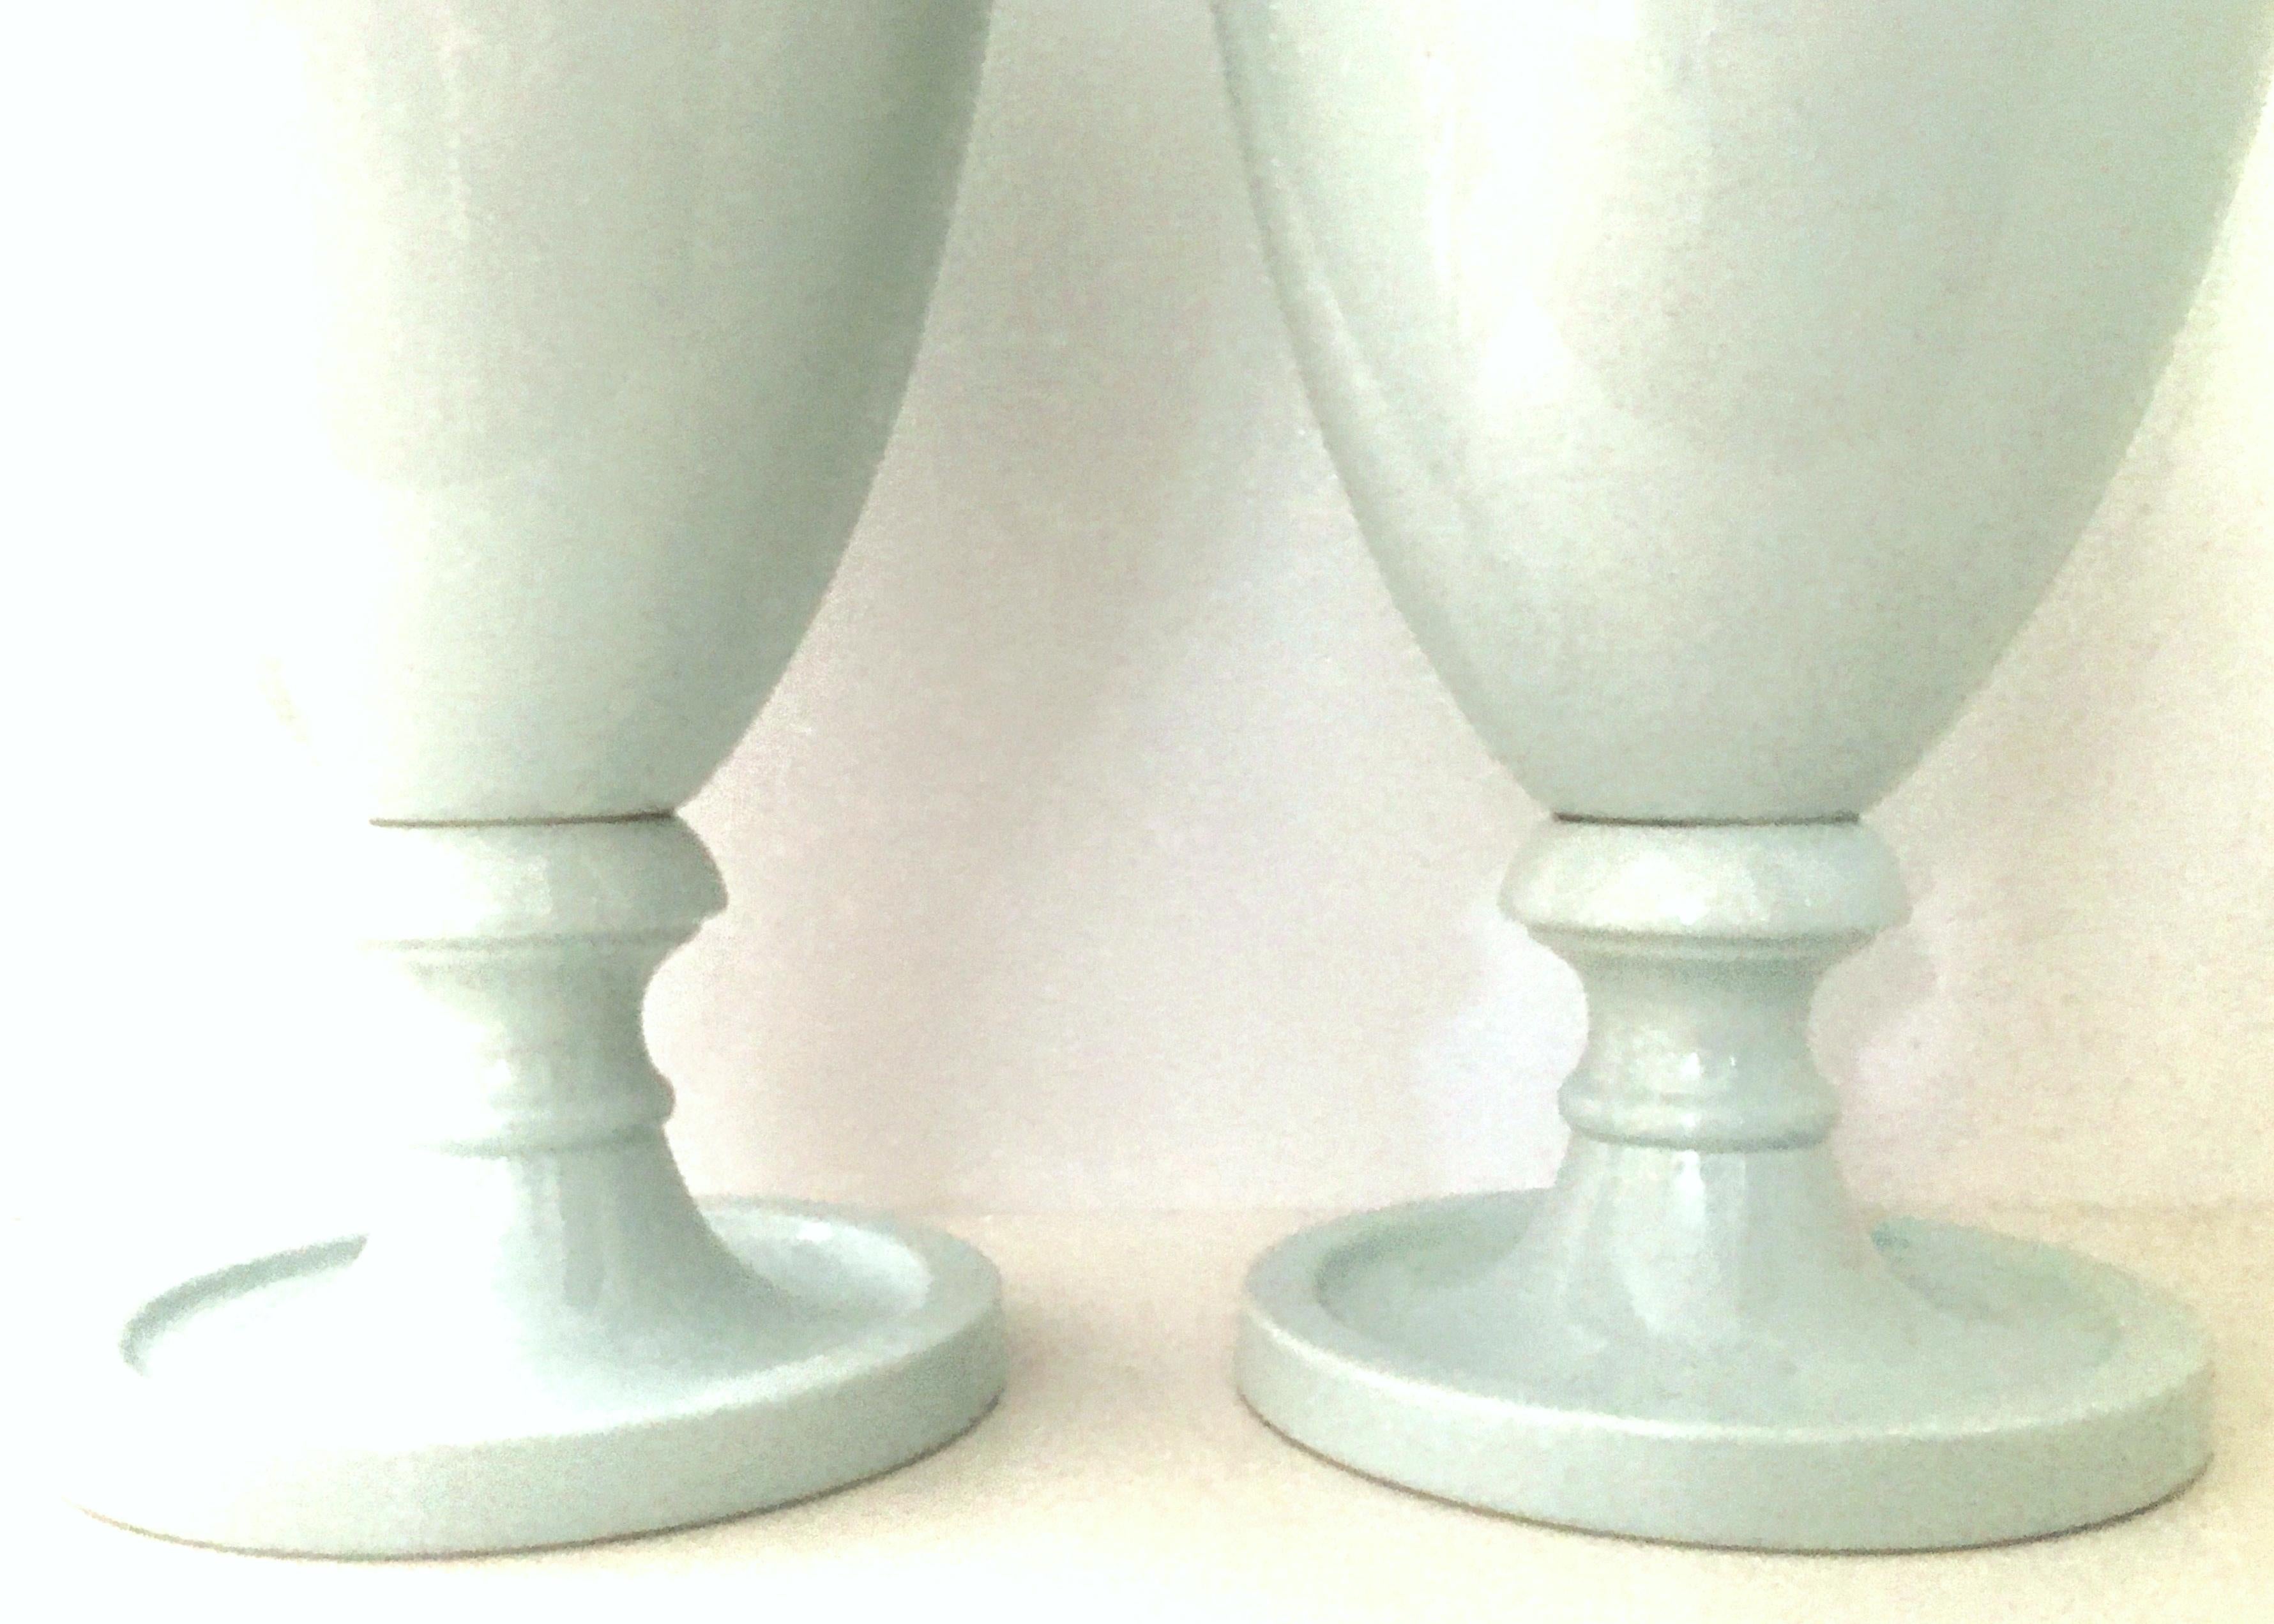 Contemporary 21st Century Pair Of Monumental Ceramic Glaze Chinese Celadon Lidded Floor Urns For Sale